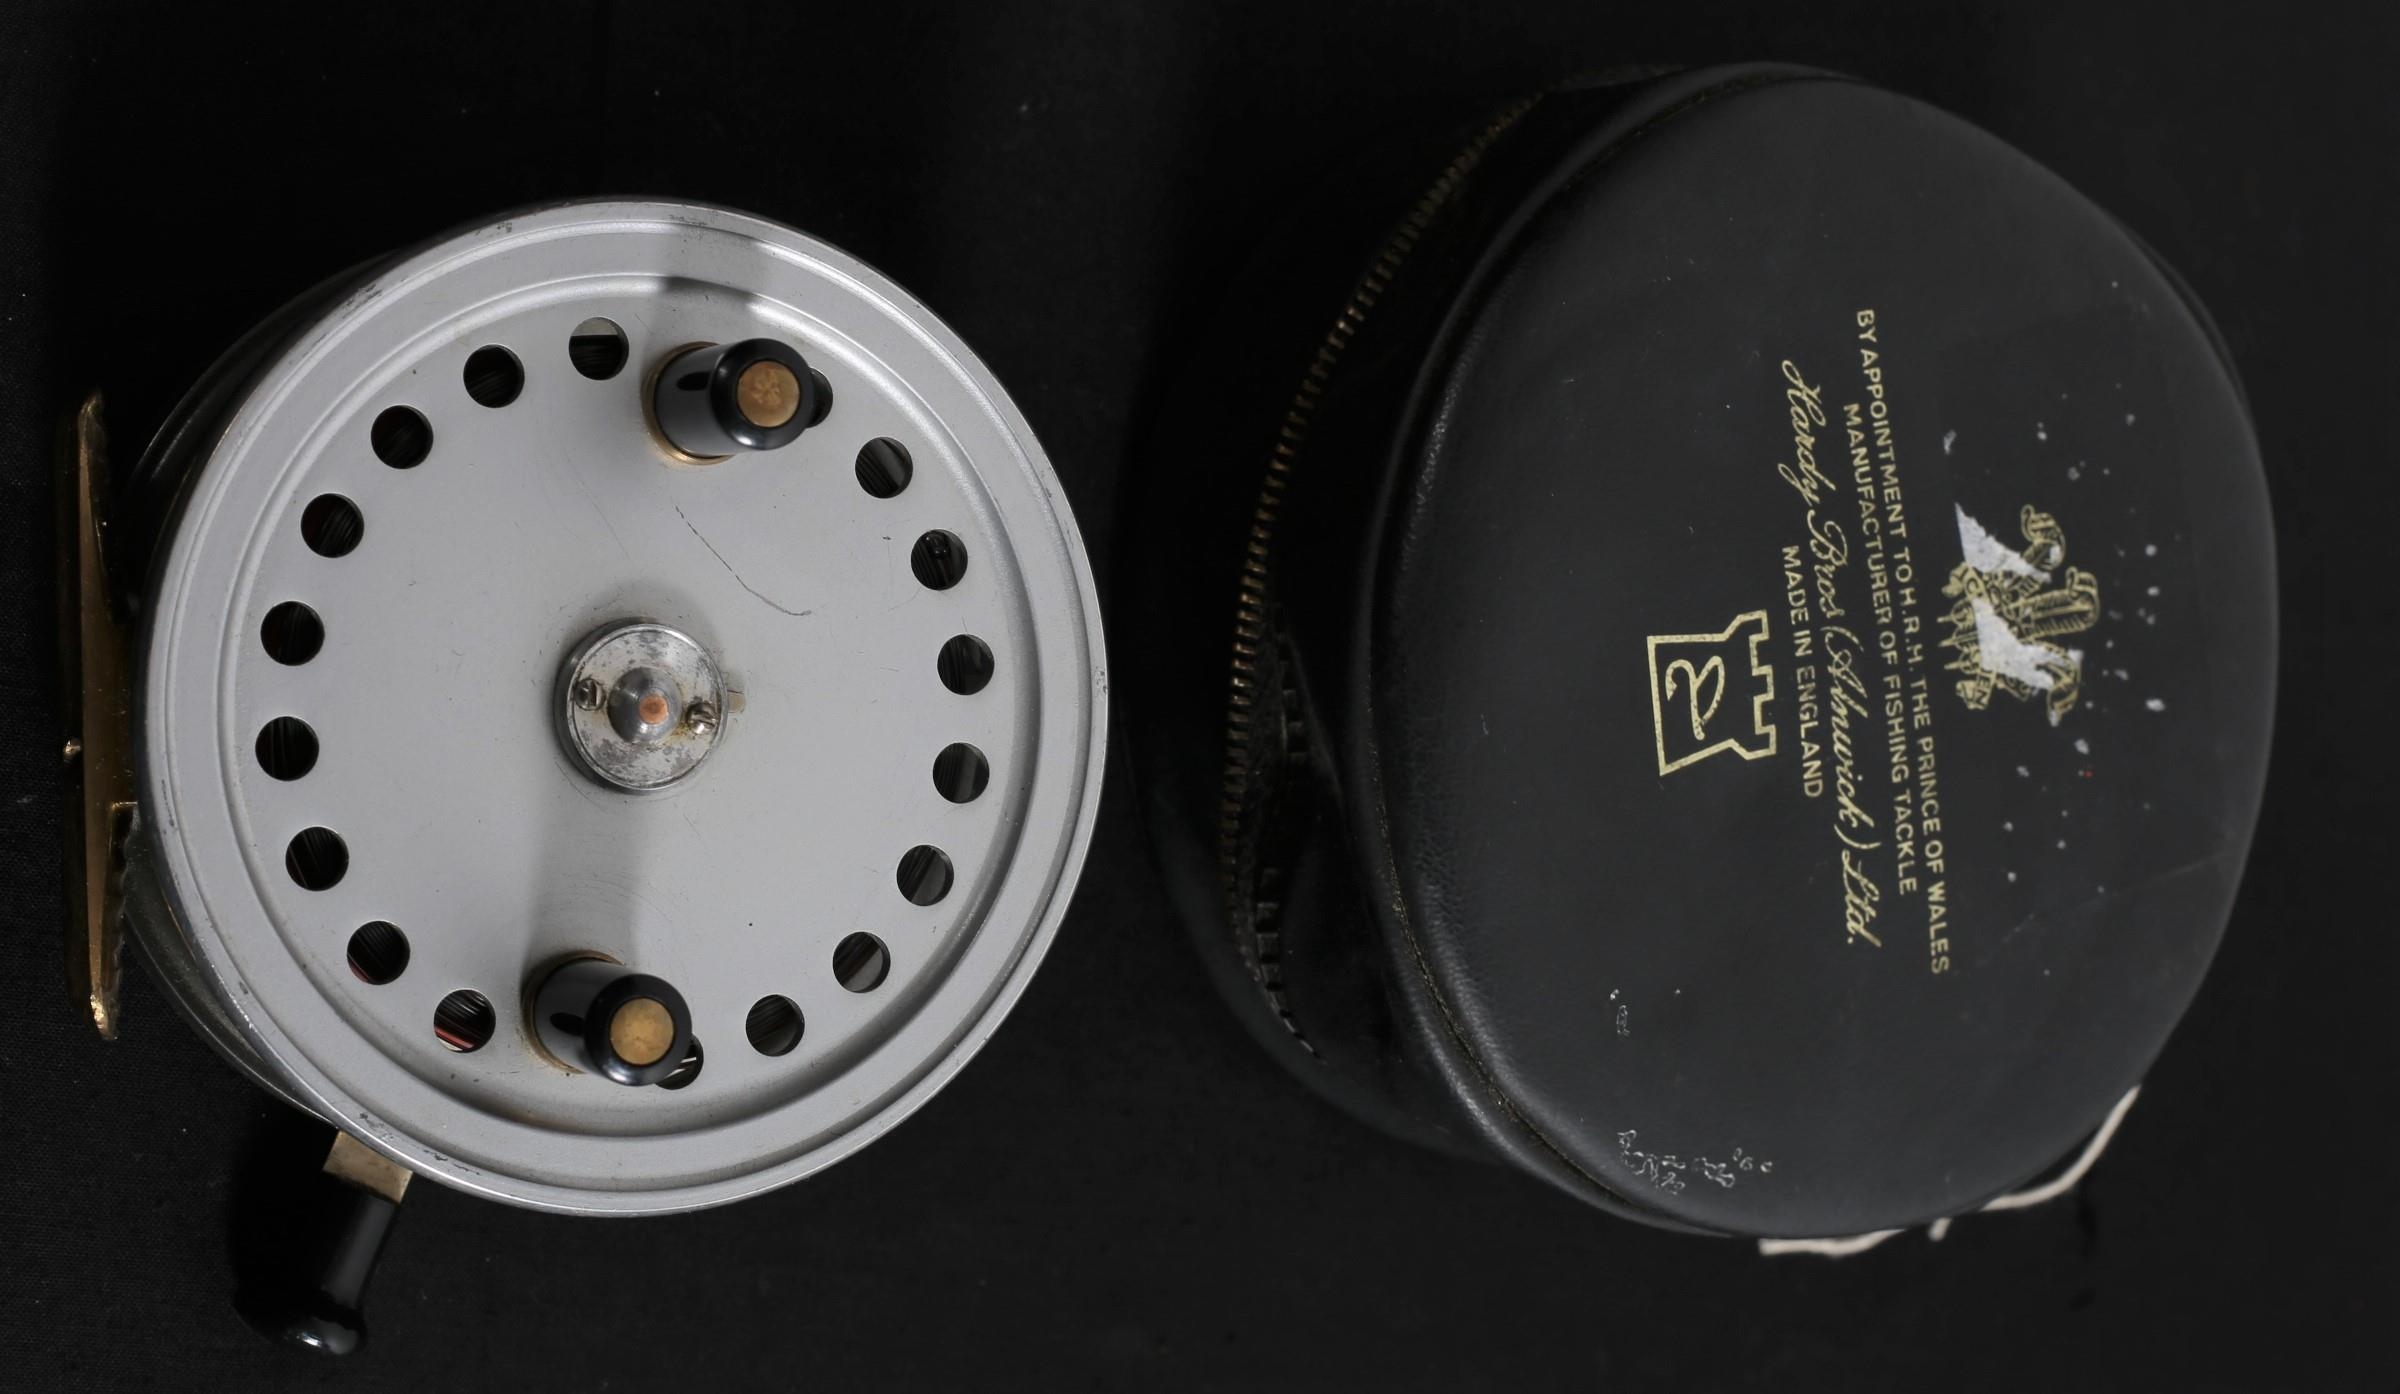 HARDY'S FLY SALMON FISHING REEL 'The Silex' (no case)